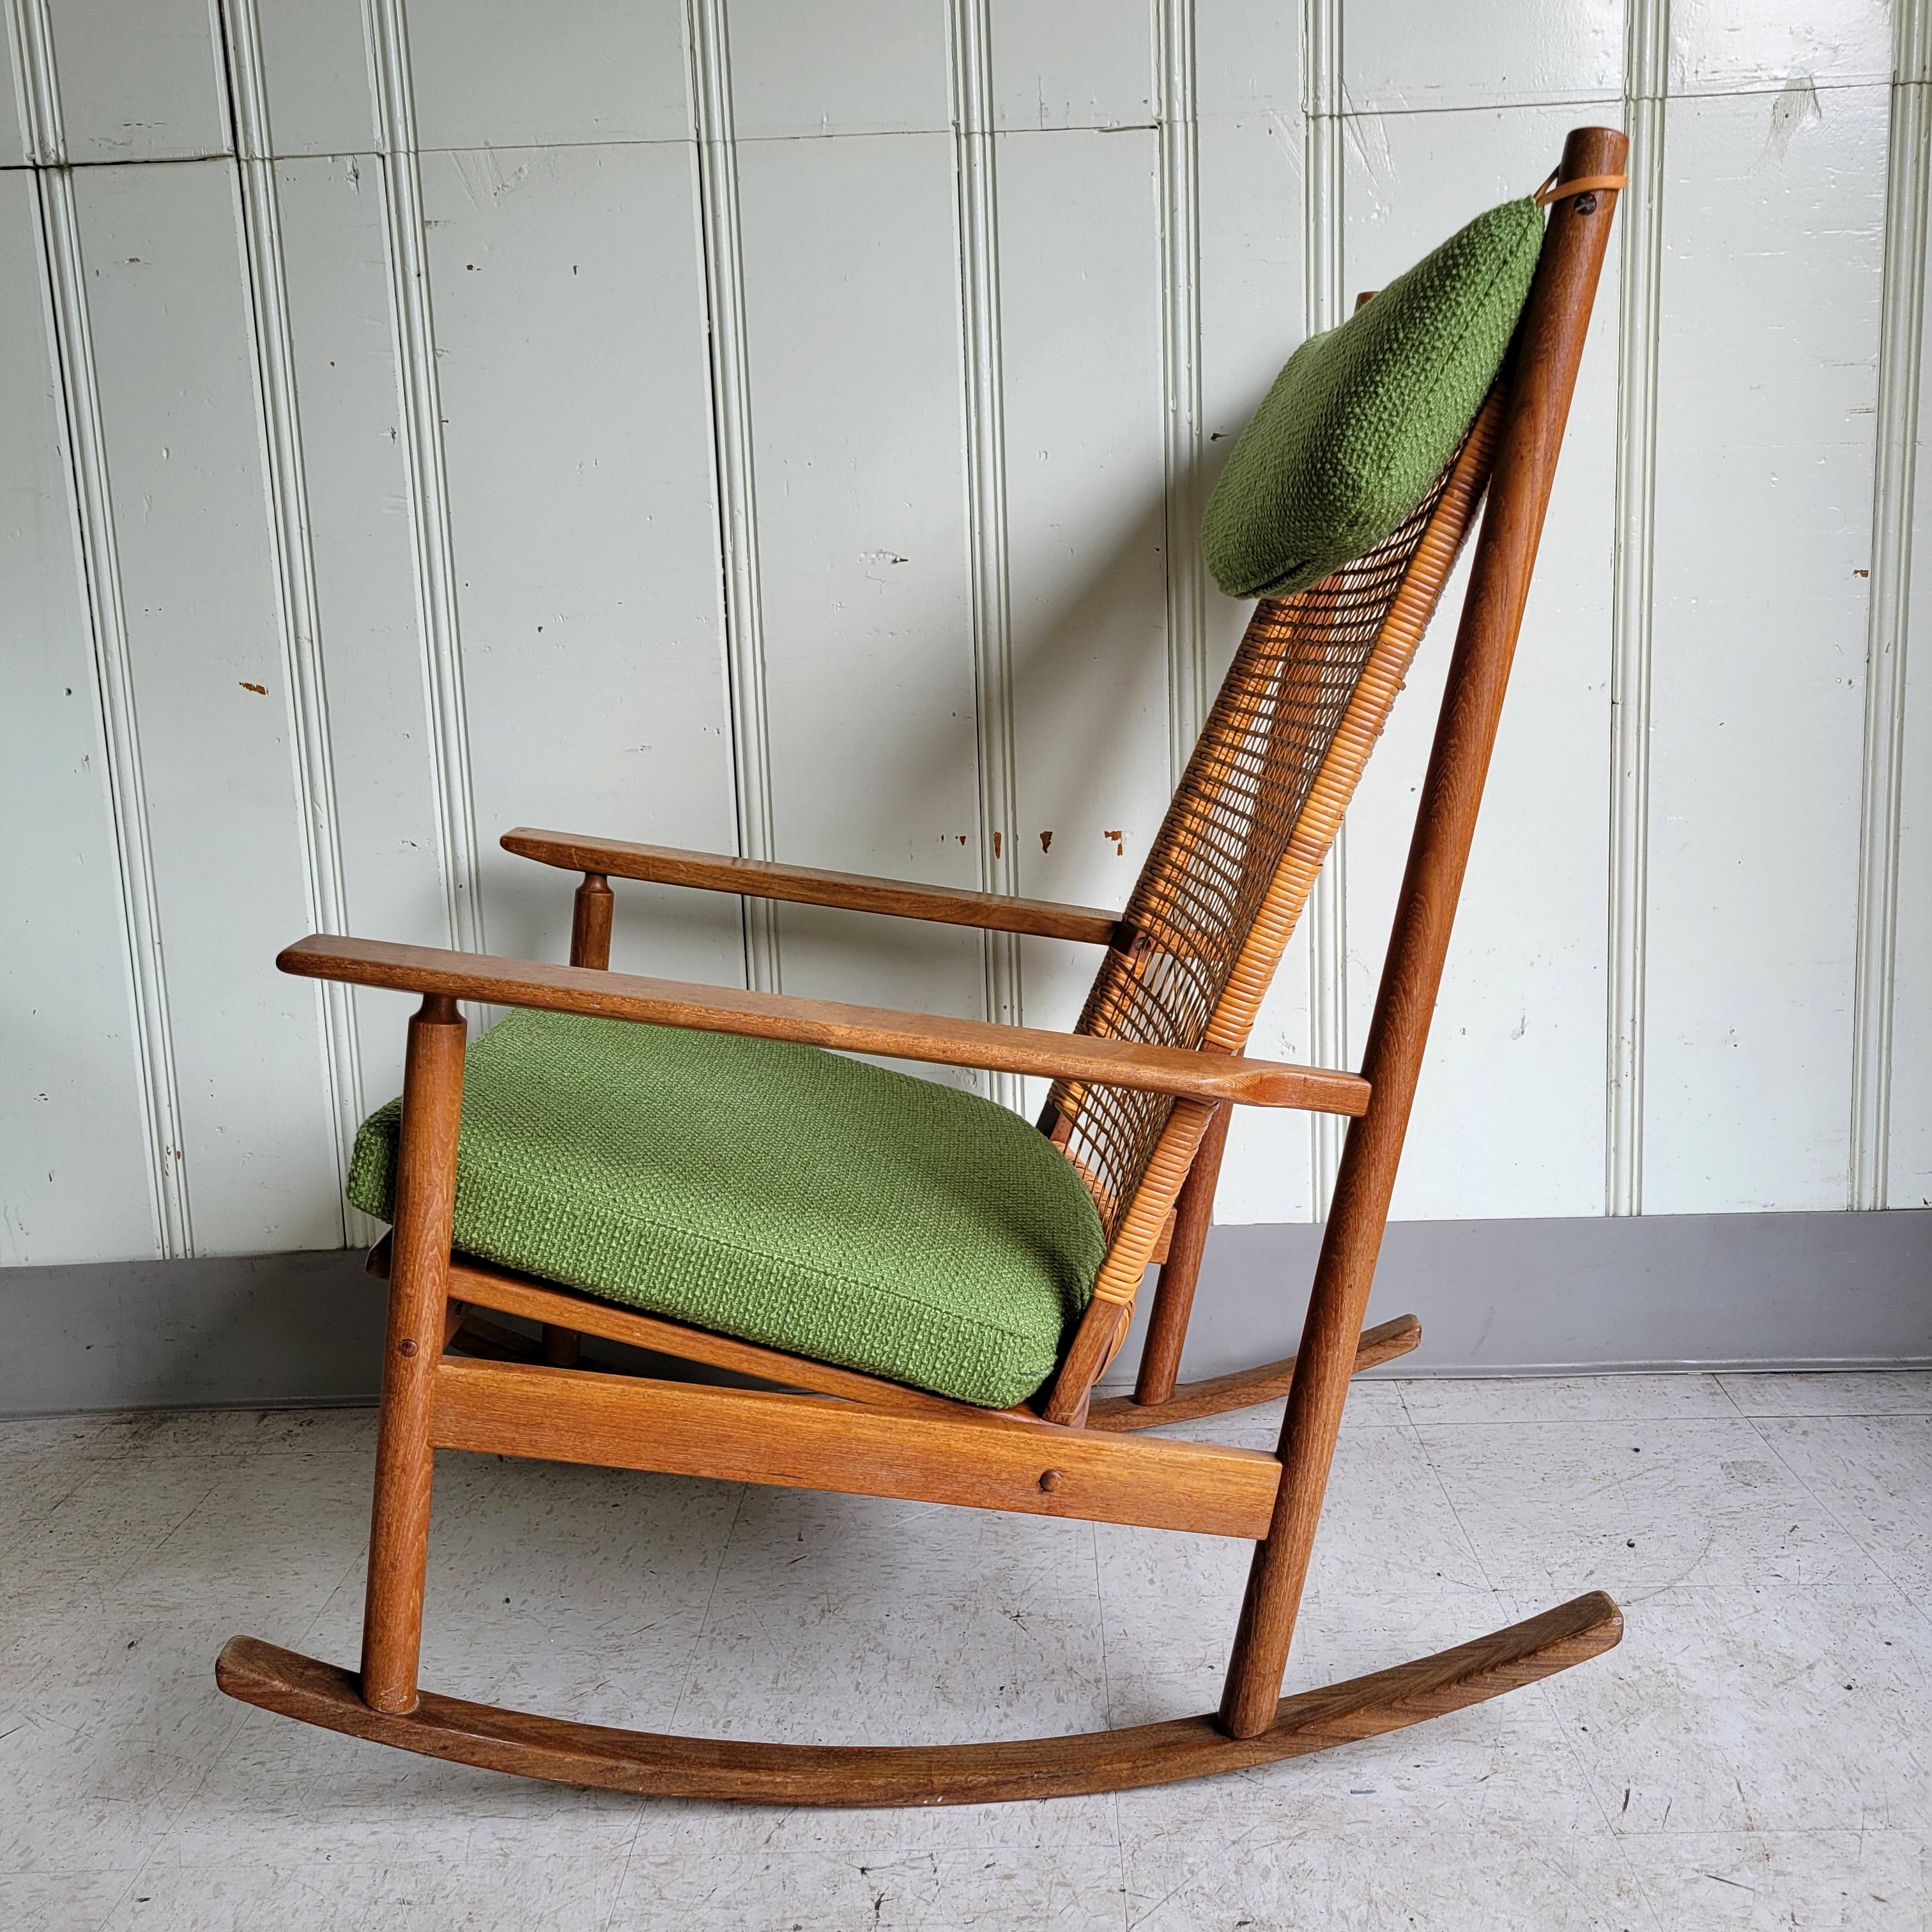 An original Hans Olsen for DUX teak + afromosia wood rocking chair. A beautifully proportioned and designed chair. All the elements work well together. The warmth of the wood, the woven cane, the wool upholstery and the leather accent. 